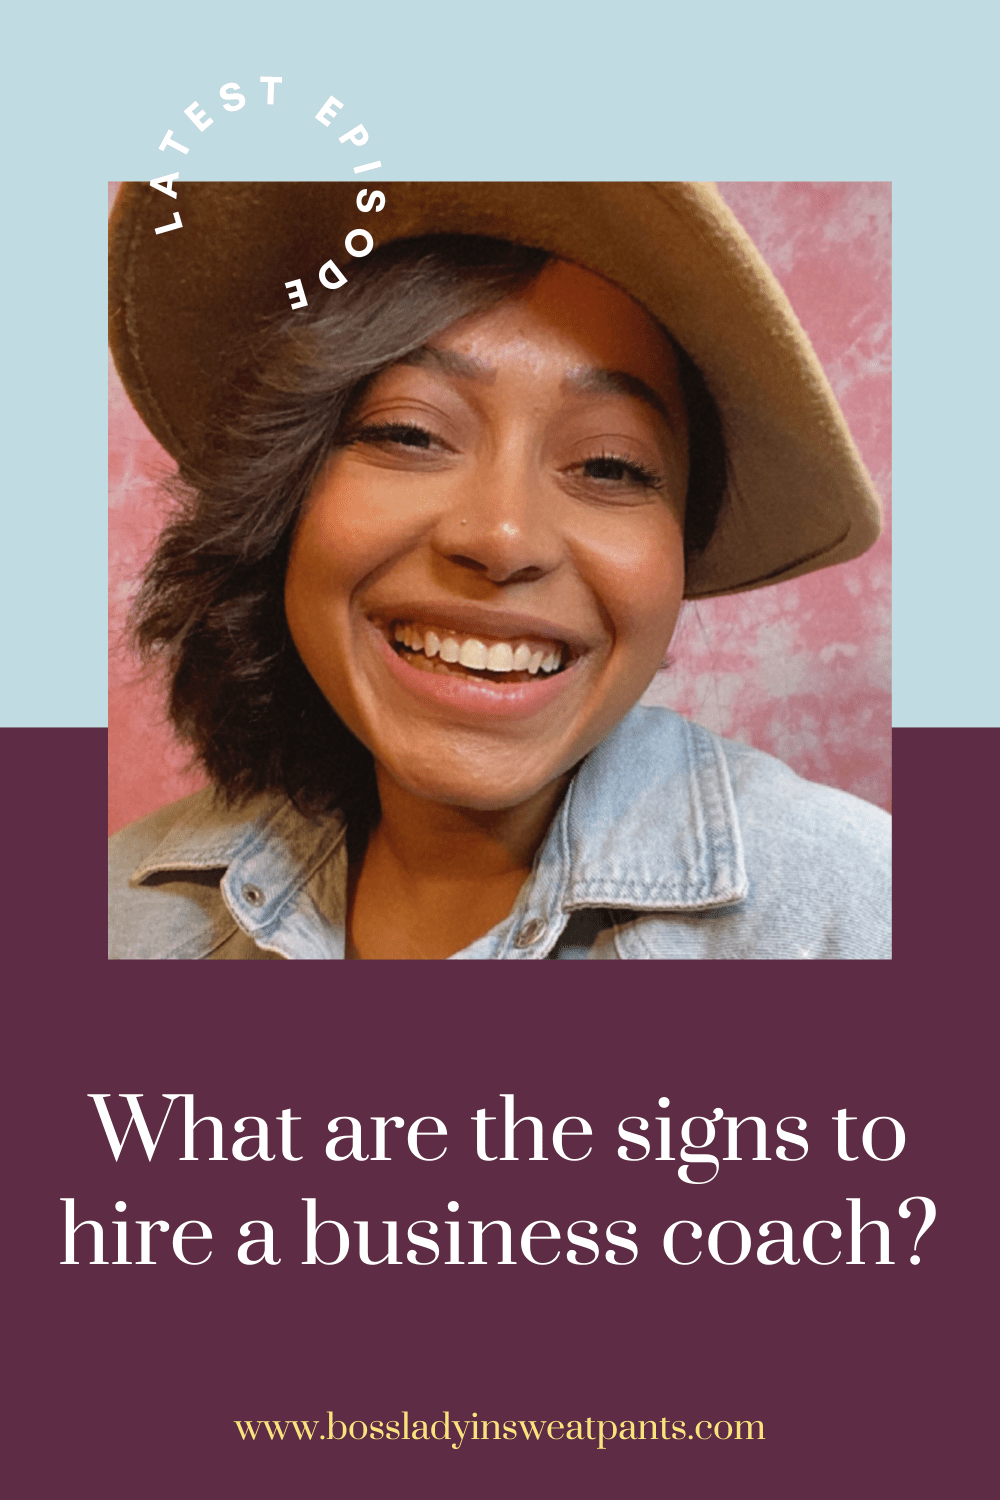 blue/purple graphic with a photo of a woman and text: what are the signs to hire a business coach